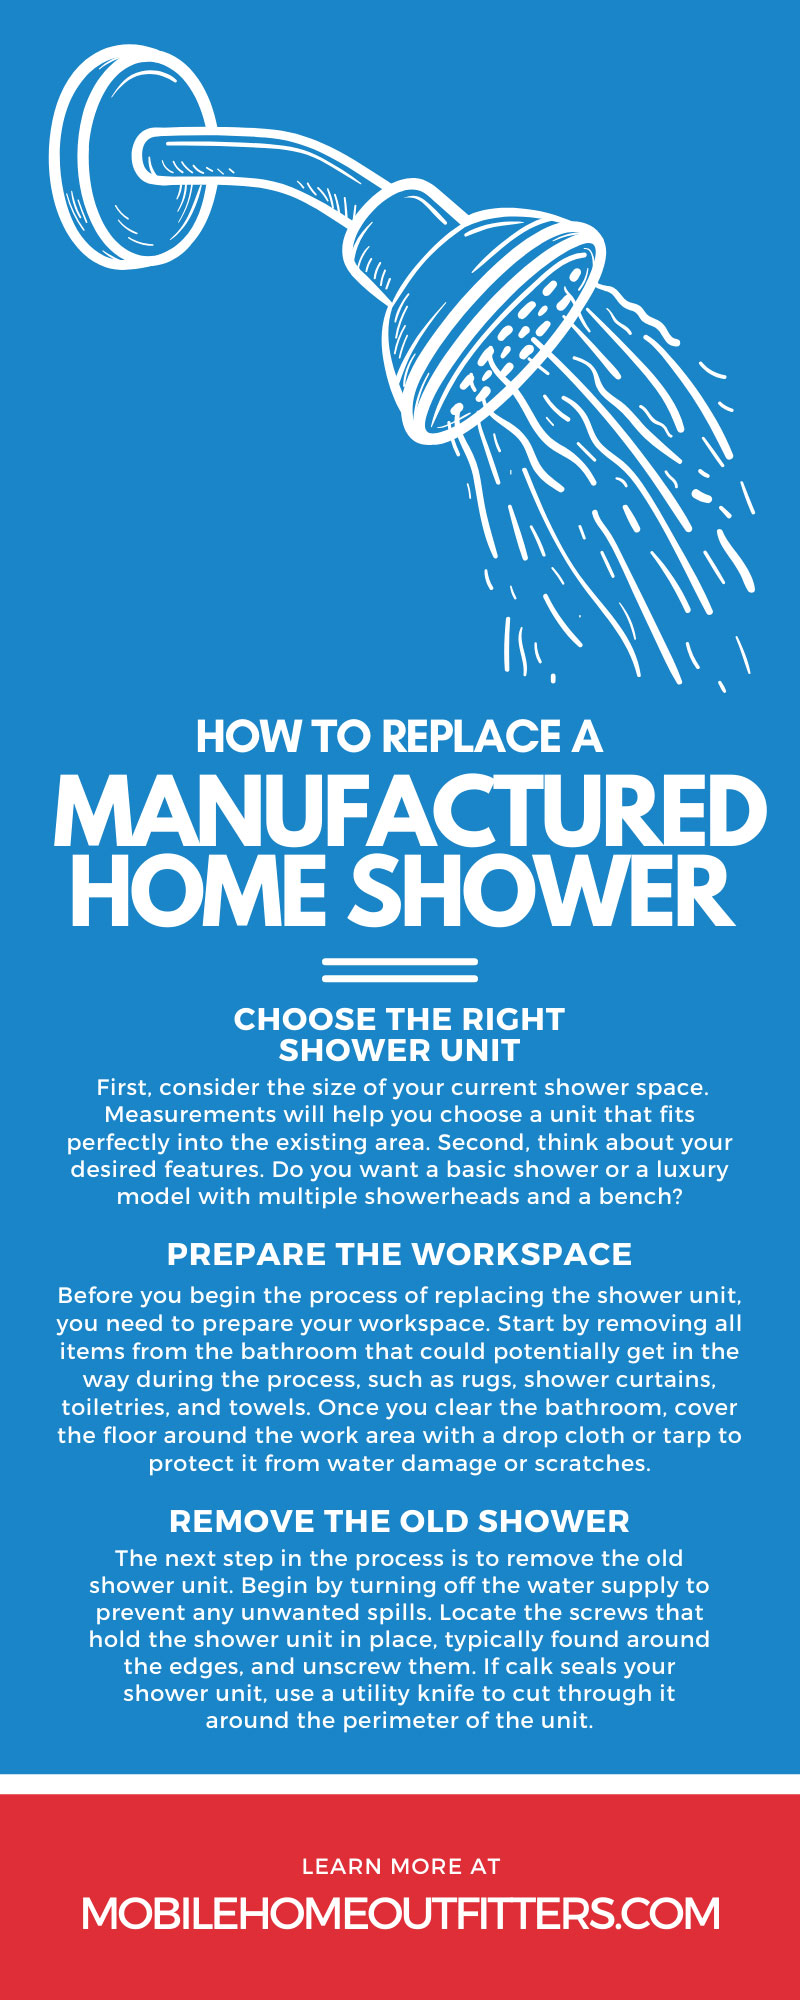 How To Replace a Manufactured Home Shower